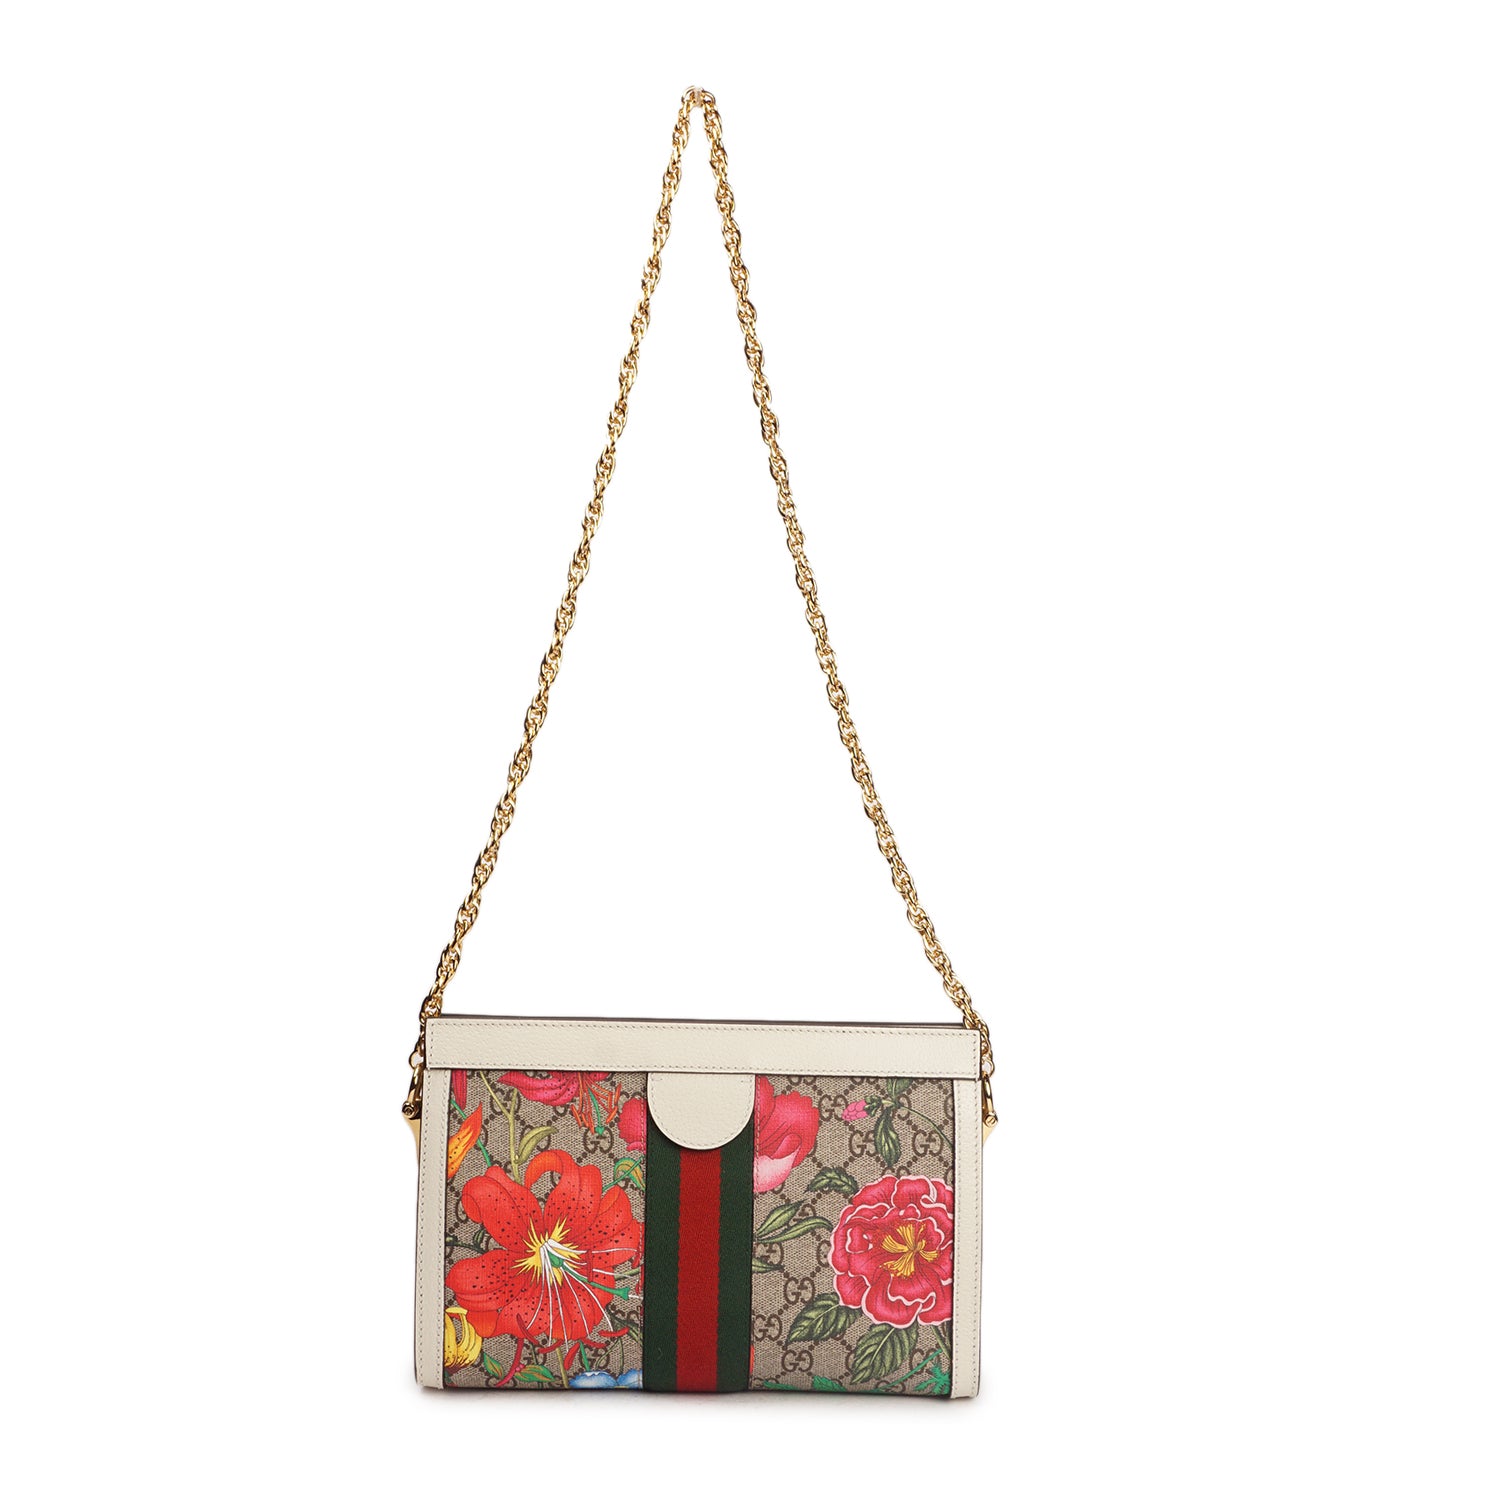 GUCCI OPHIDIA GG FLORA SMALL SHOULDER BAG IN RED